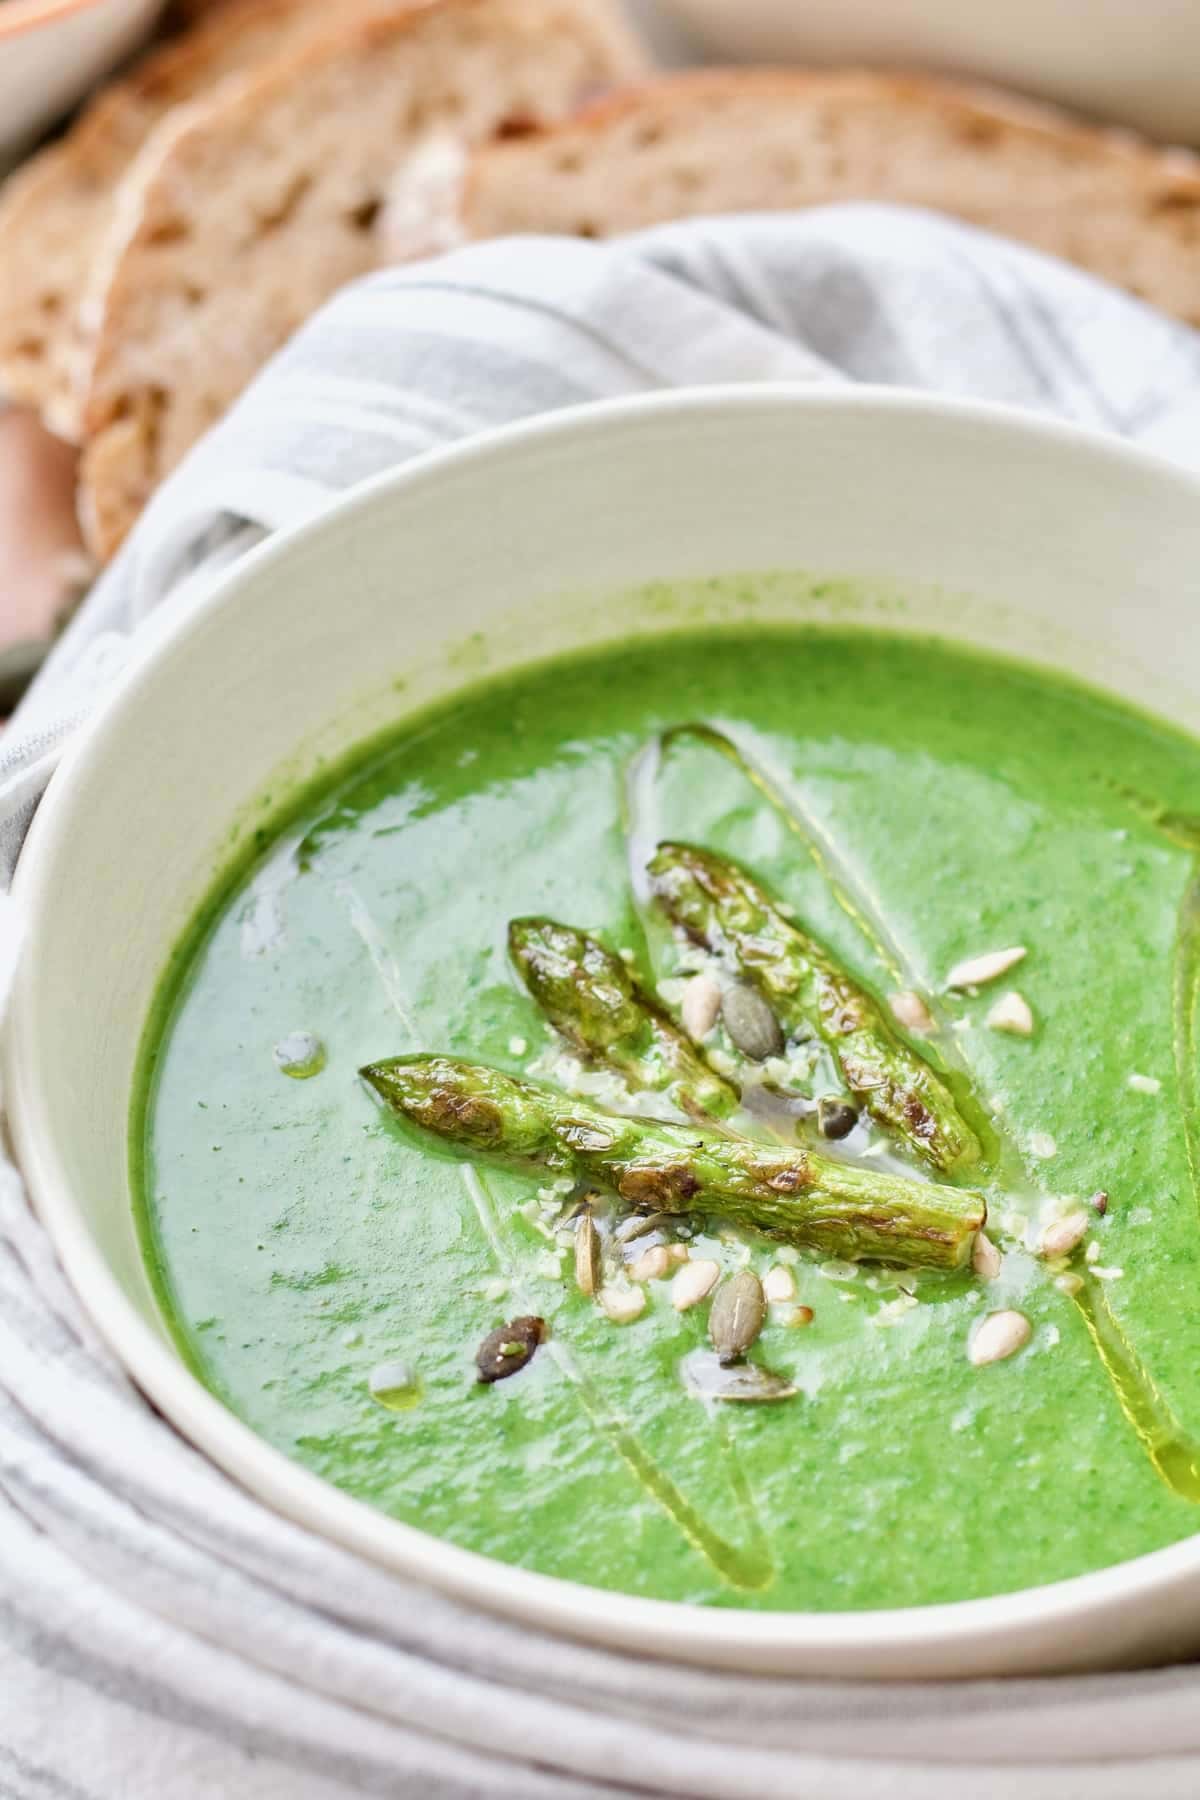 Bowl of asparagus soup with spinach wrapped in towel.